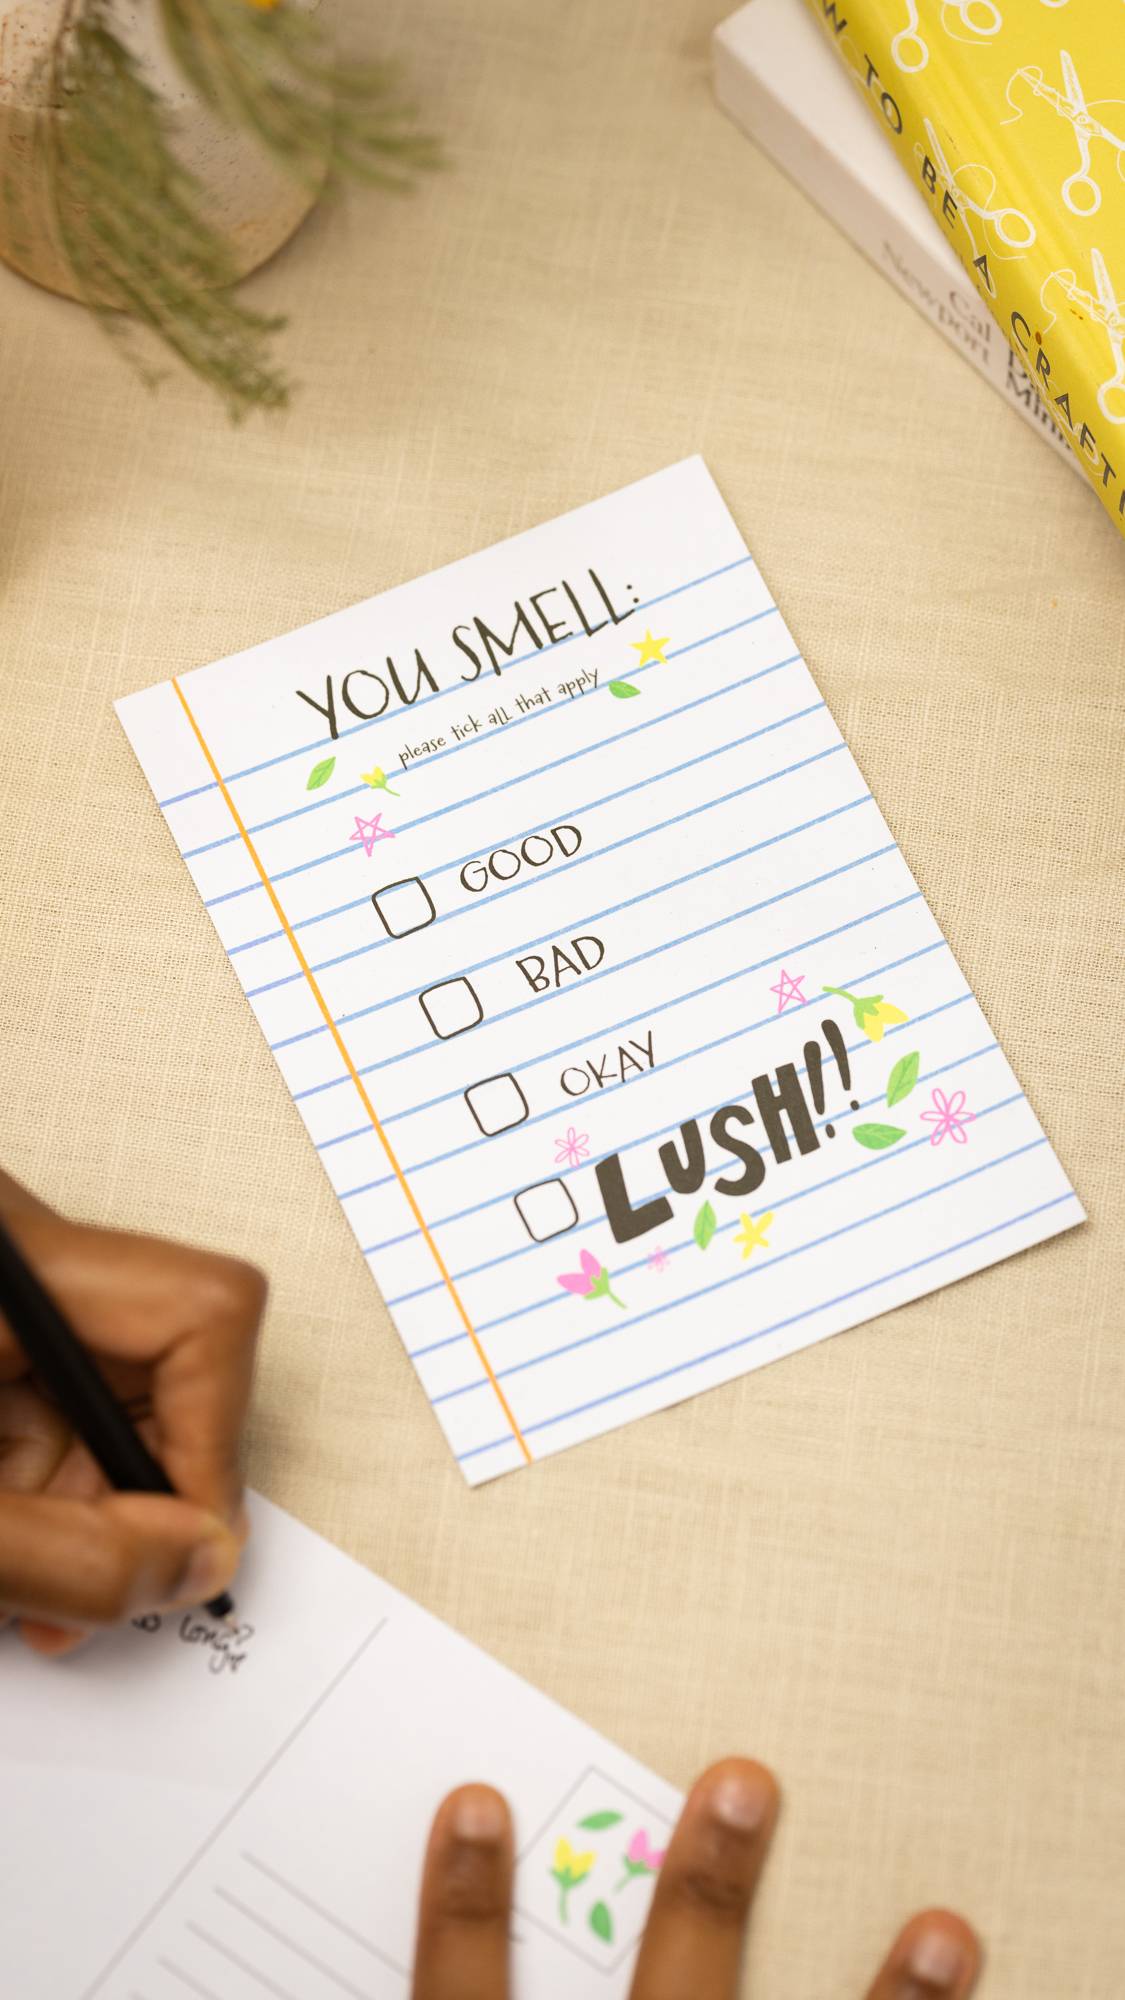 The You Smell: Good, Bad, Okay or LUSH postcard laying on a table as the model writes another card.